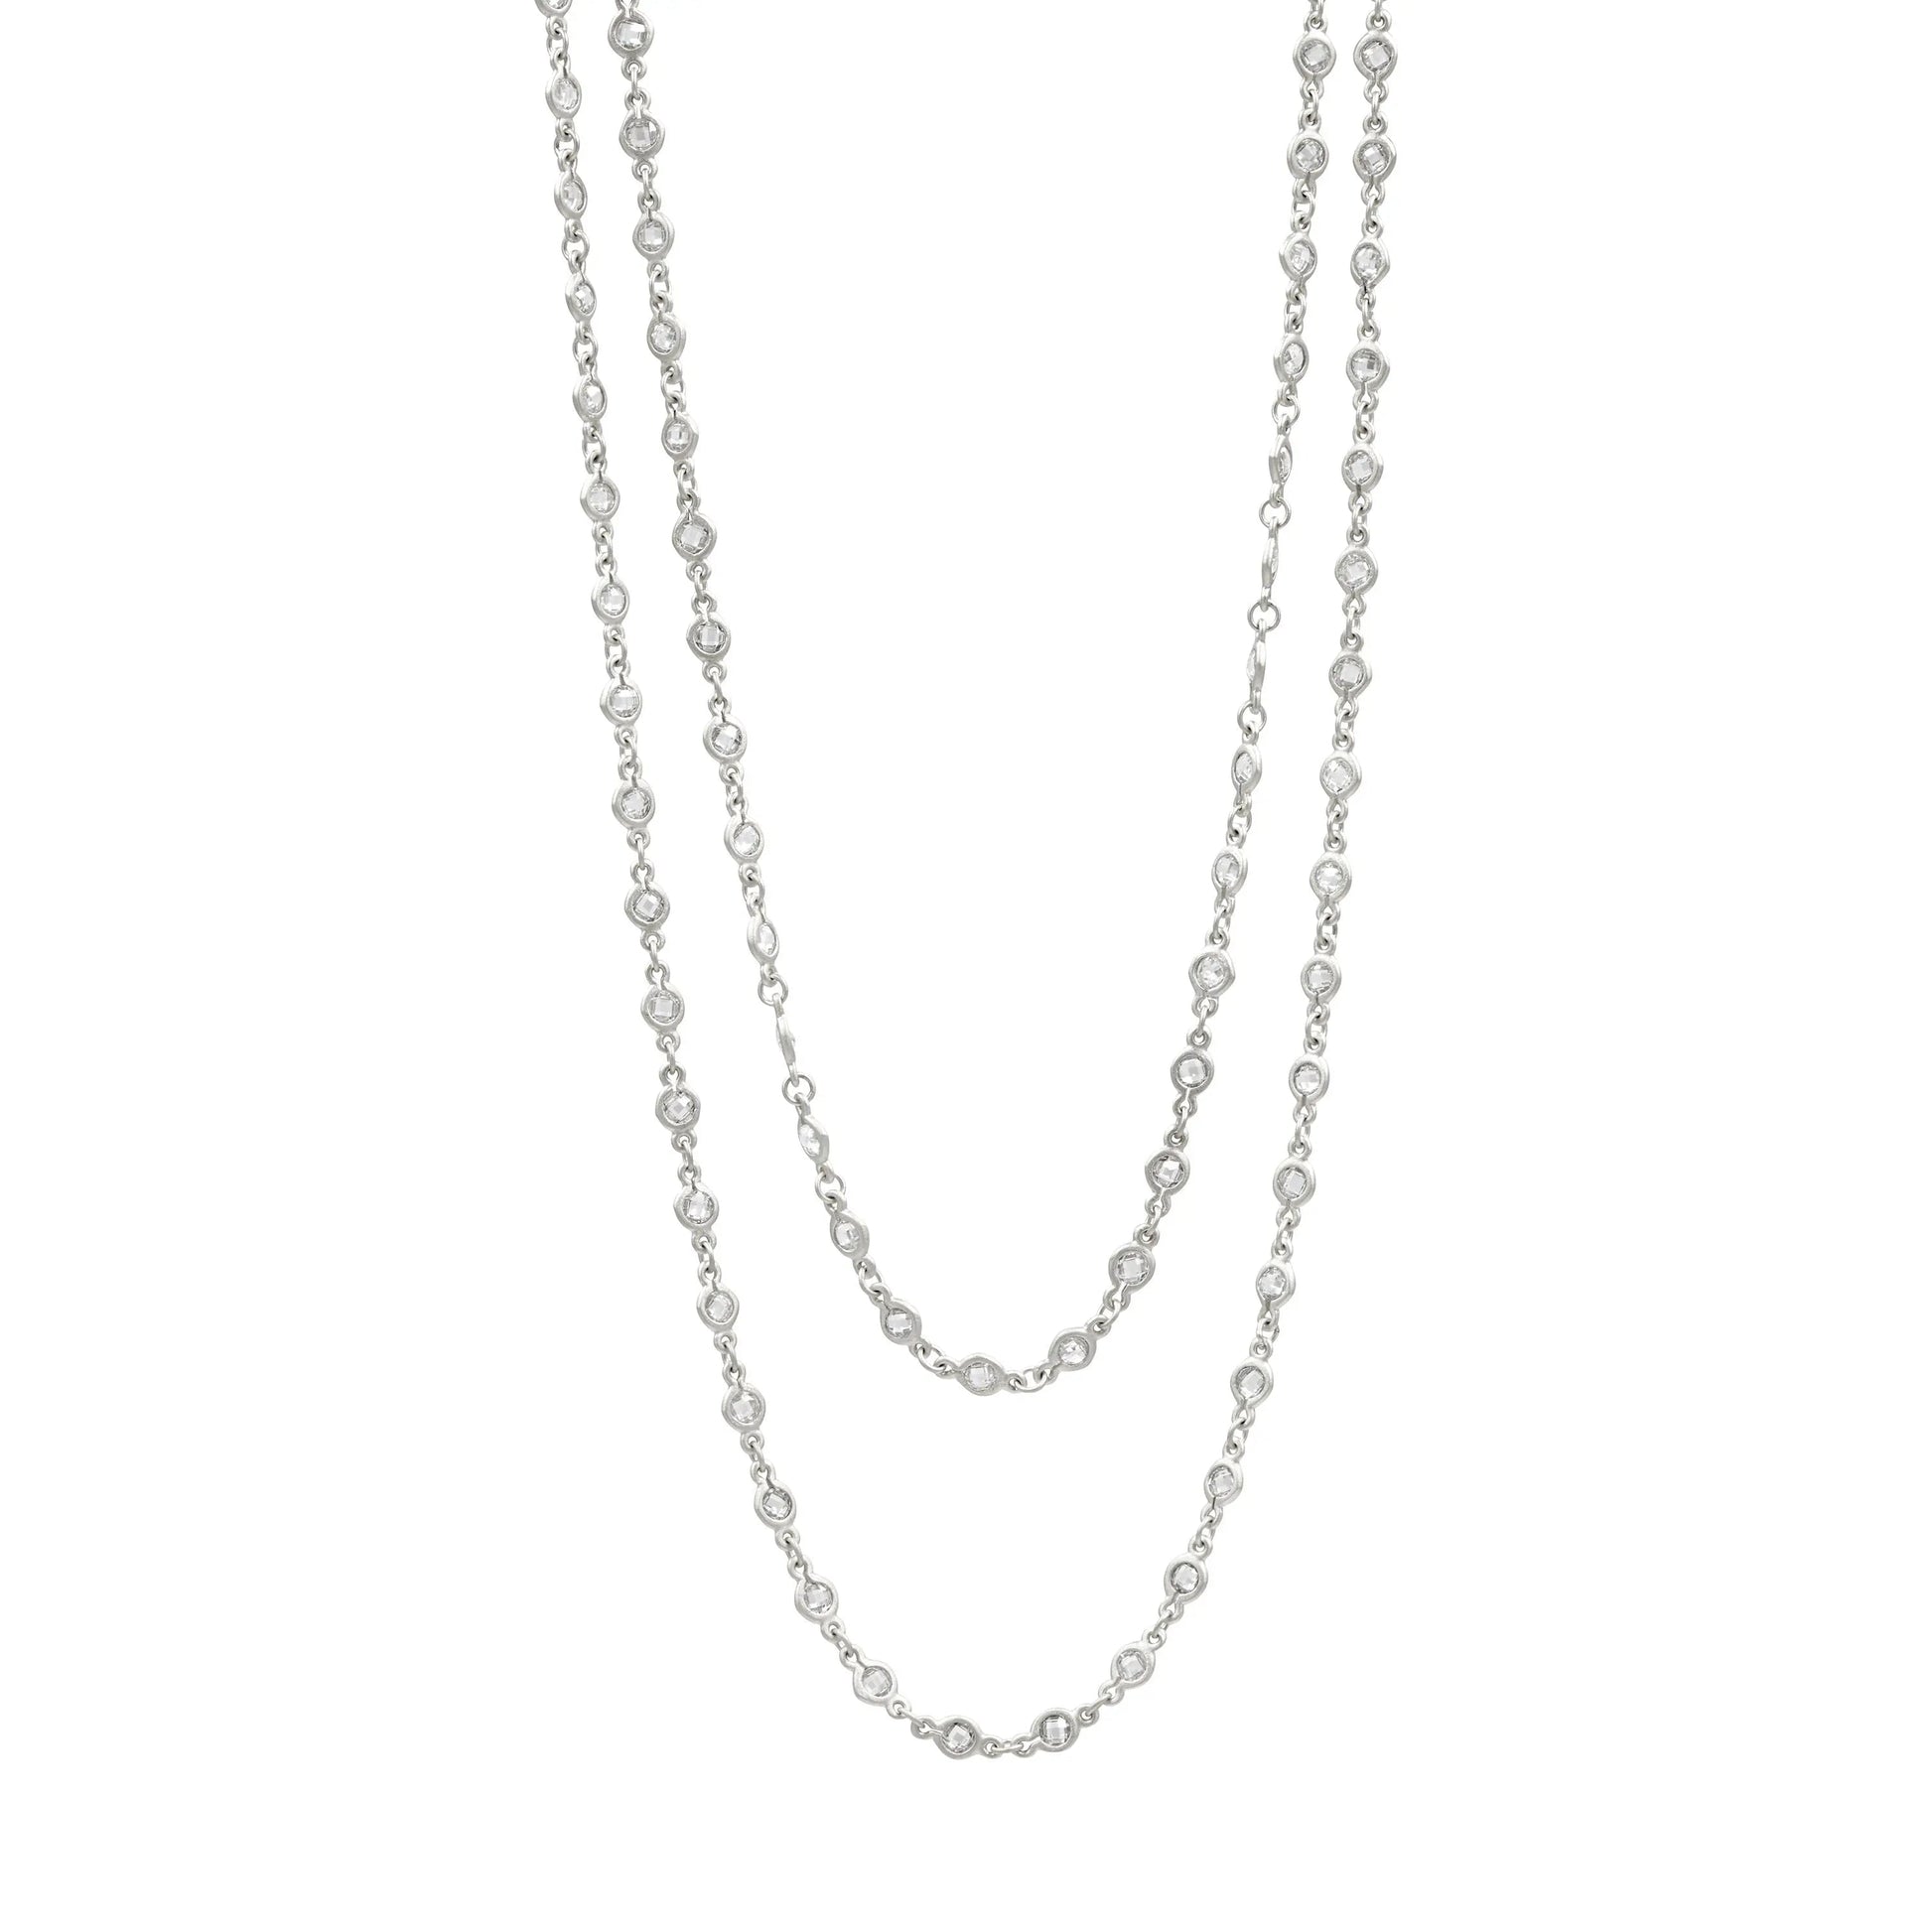 Silver Faceted Stones Wrap Chain Necklace Signature NECKLACE